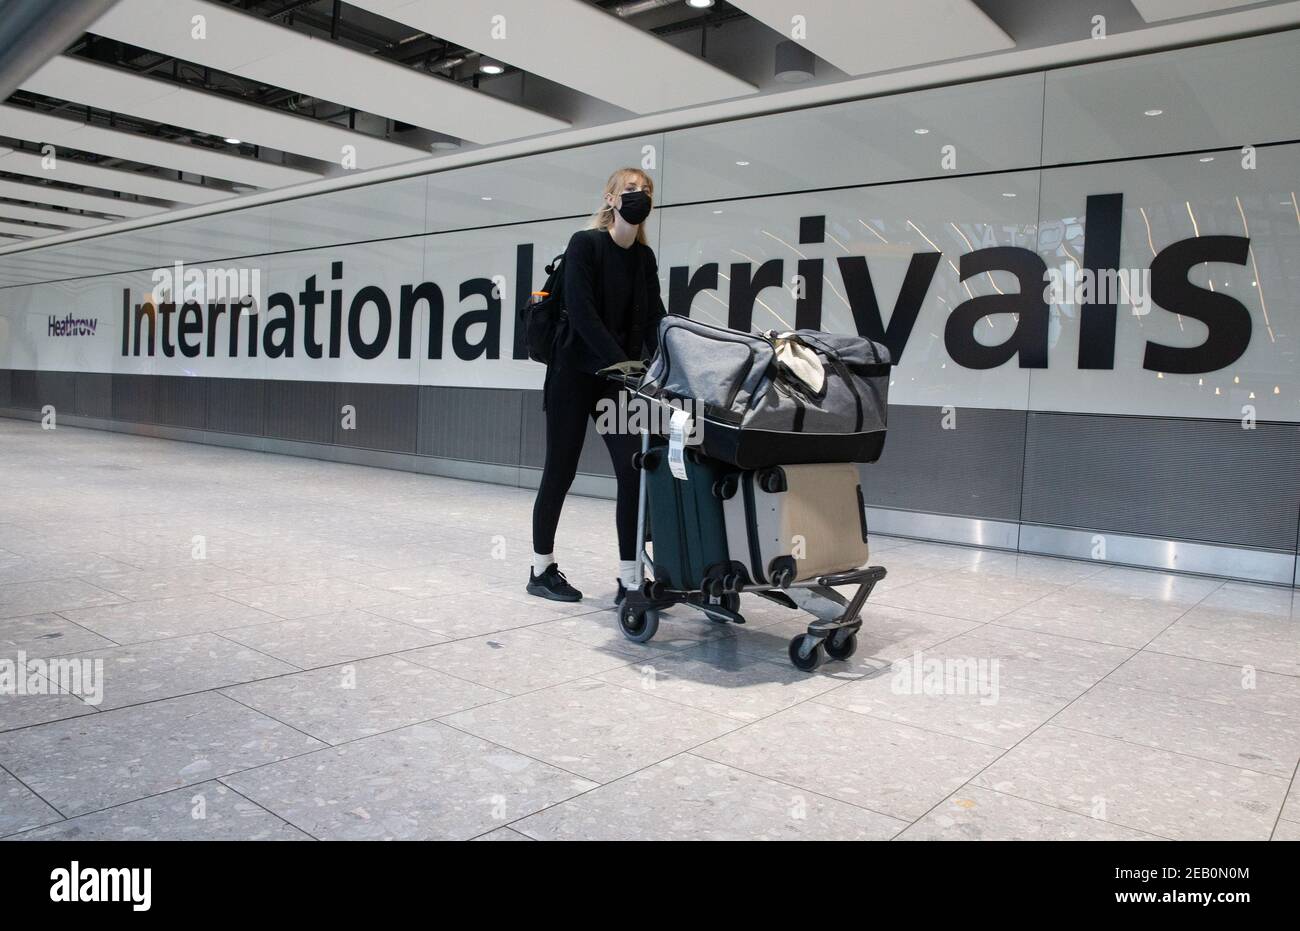 London, UK. 11th Feb, 2021. International Arrivals at Heathrow Terminal 5. People arriving in England from 'red list' countries, including UK residents, must isolate for 10 days in hotels, costing £1,750 from February 15th. Health Secretary made the announcement in the House of Commons on FEbraury 10th. Credit: Mark Thomas/Alamy Live News Stock Photo